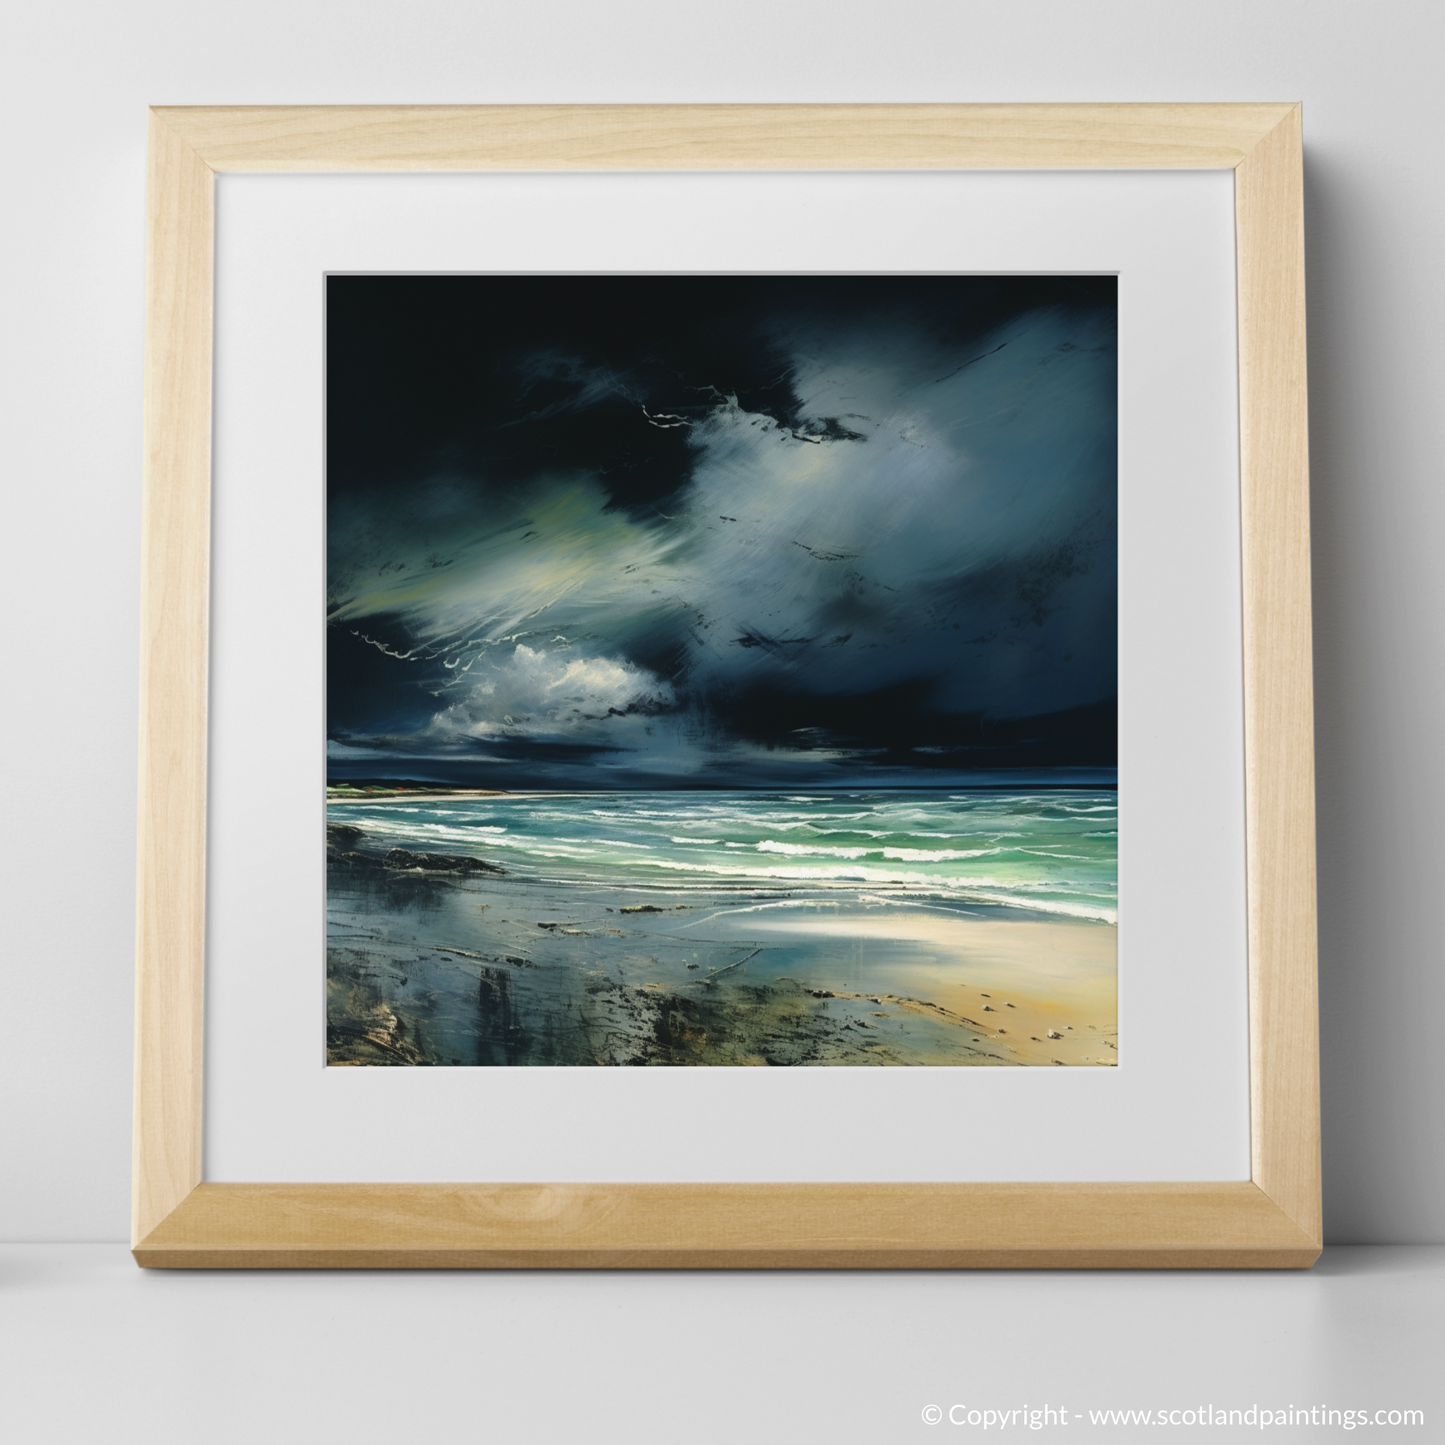 Storm's Embrace: A Surrealistic Vision of Nairn Beach